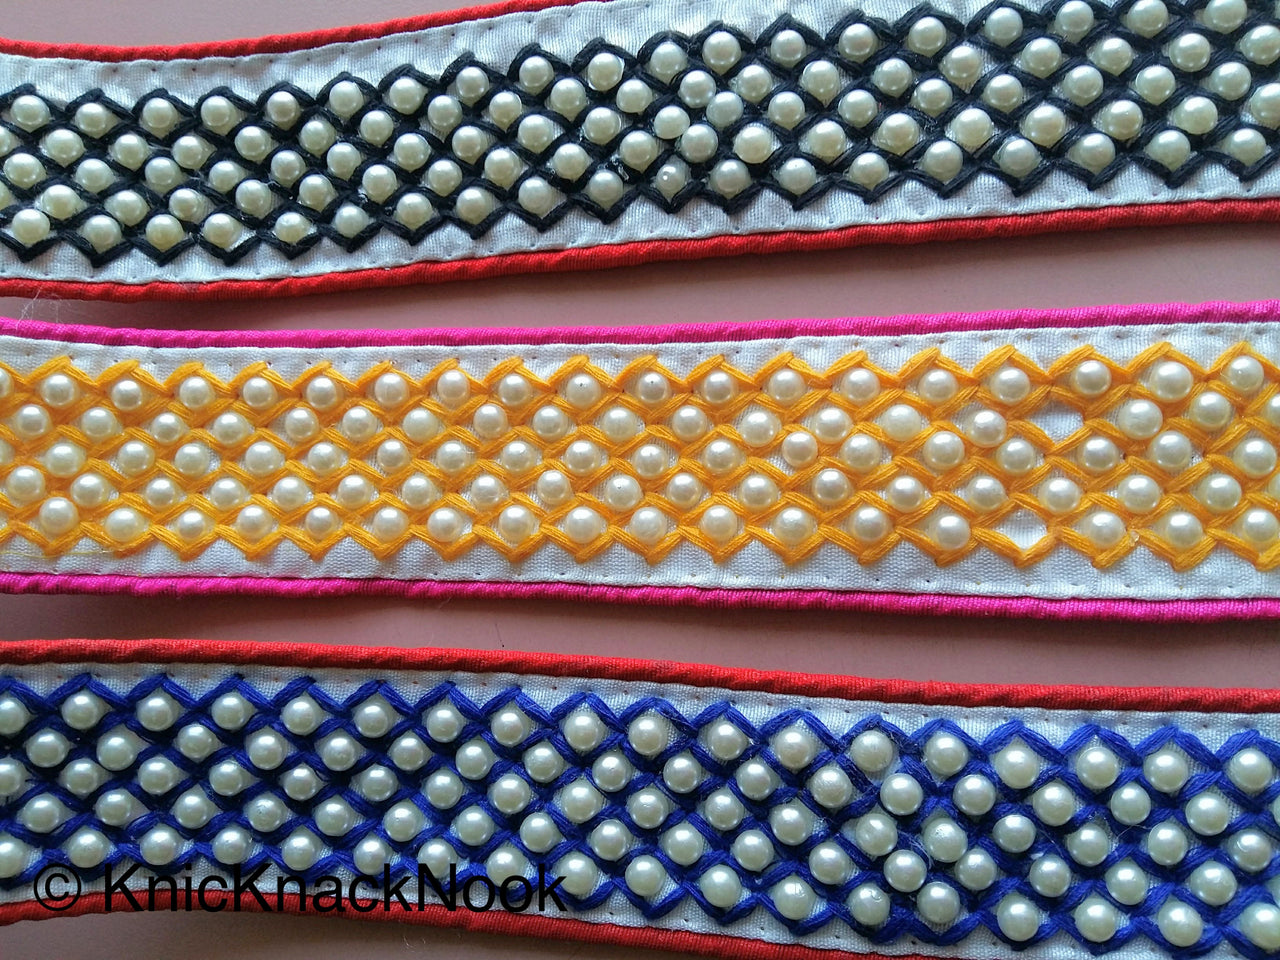 Red / Pink And White Fabric Trim With Blue / Black/ Yellow Embroidery With Off White Pearls, Approx. 40mm Wide - 200317L166 / 67 / 68Trim